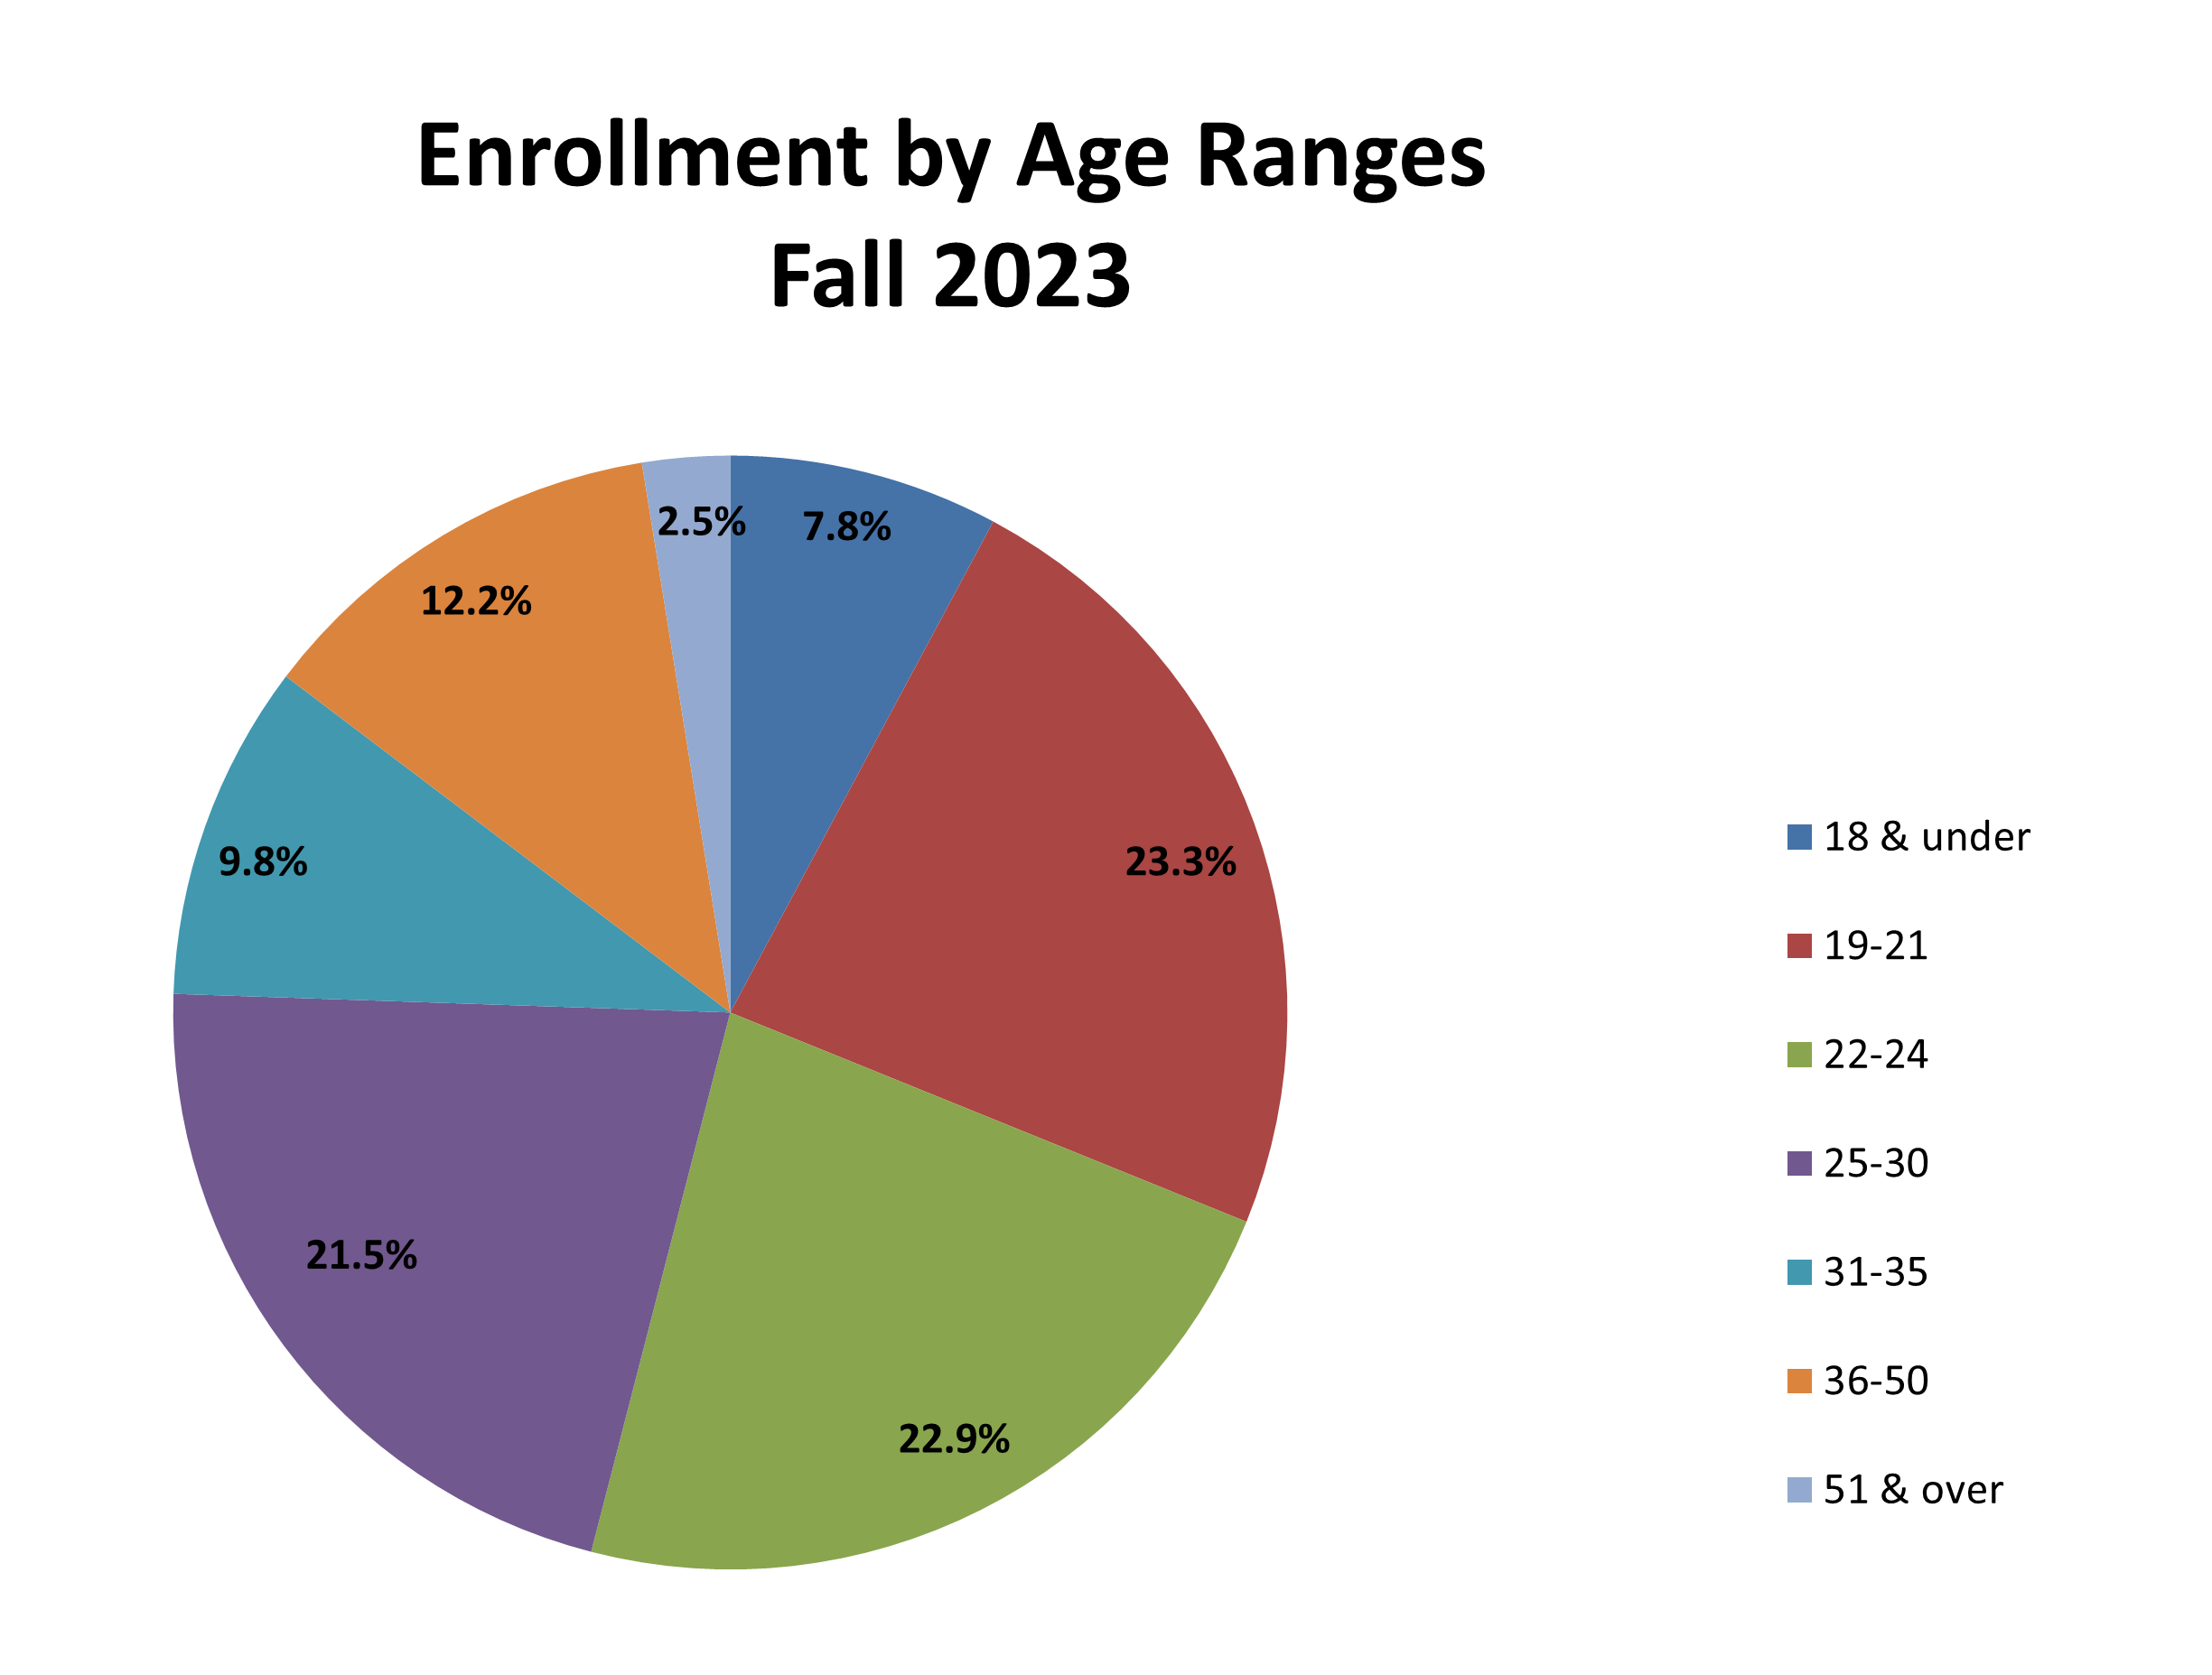 Enrollment by age pie chart